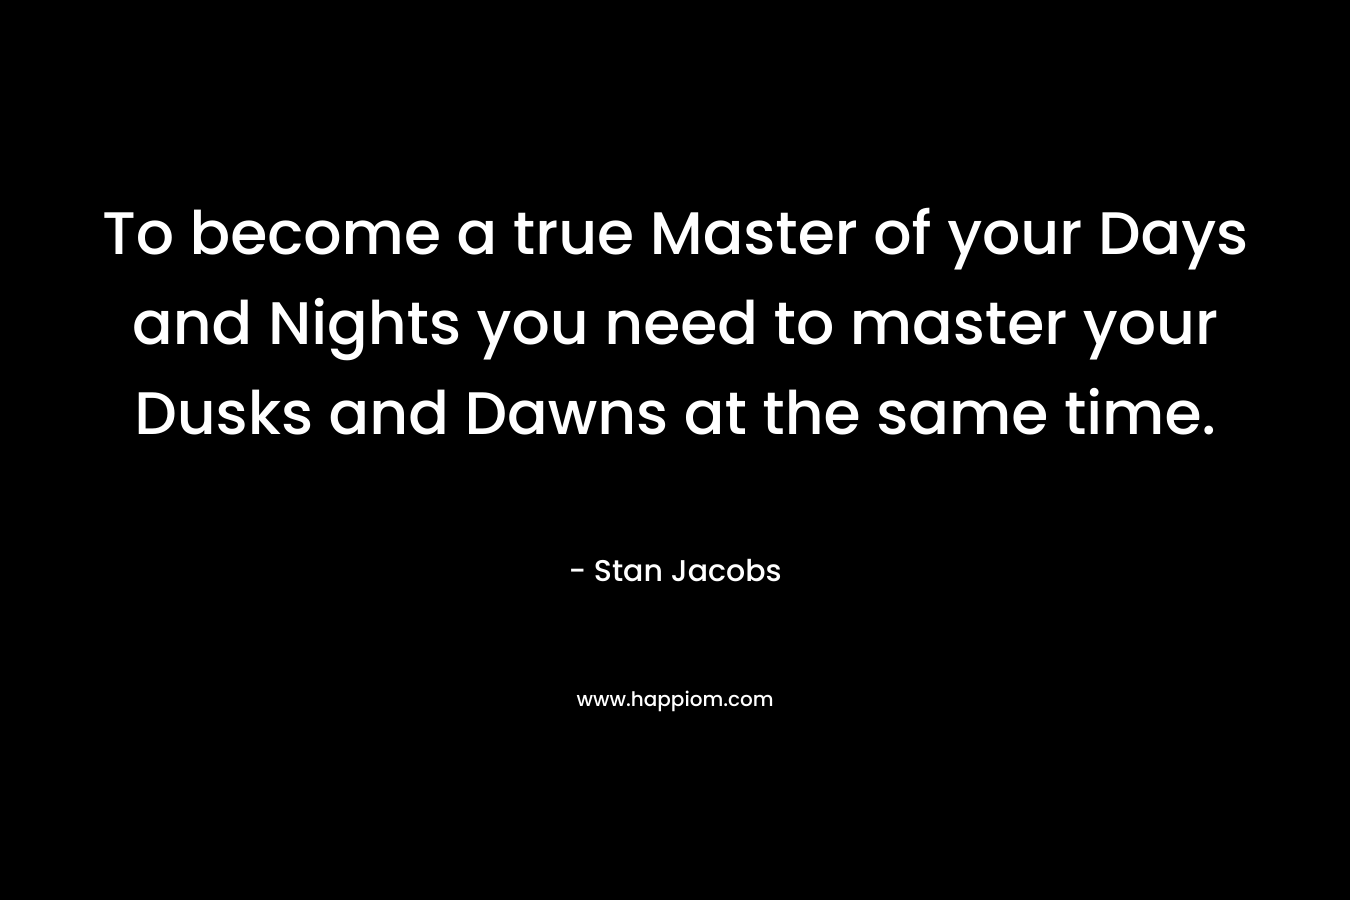 To become a true Master of your Days and Nights you need to master your Dusks and Dawns at the same time.